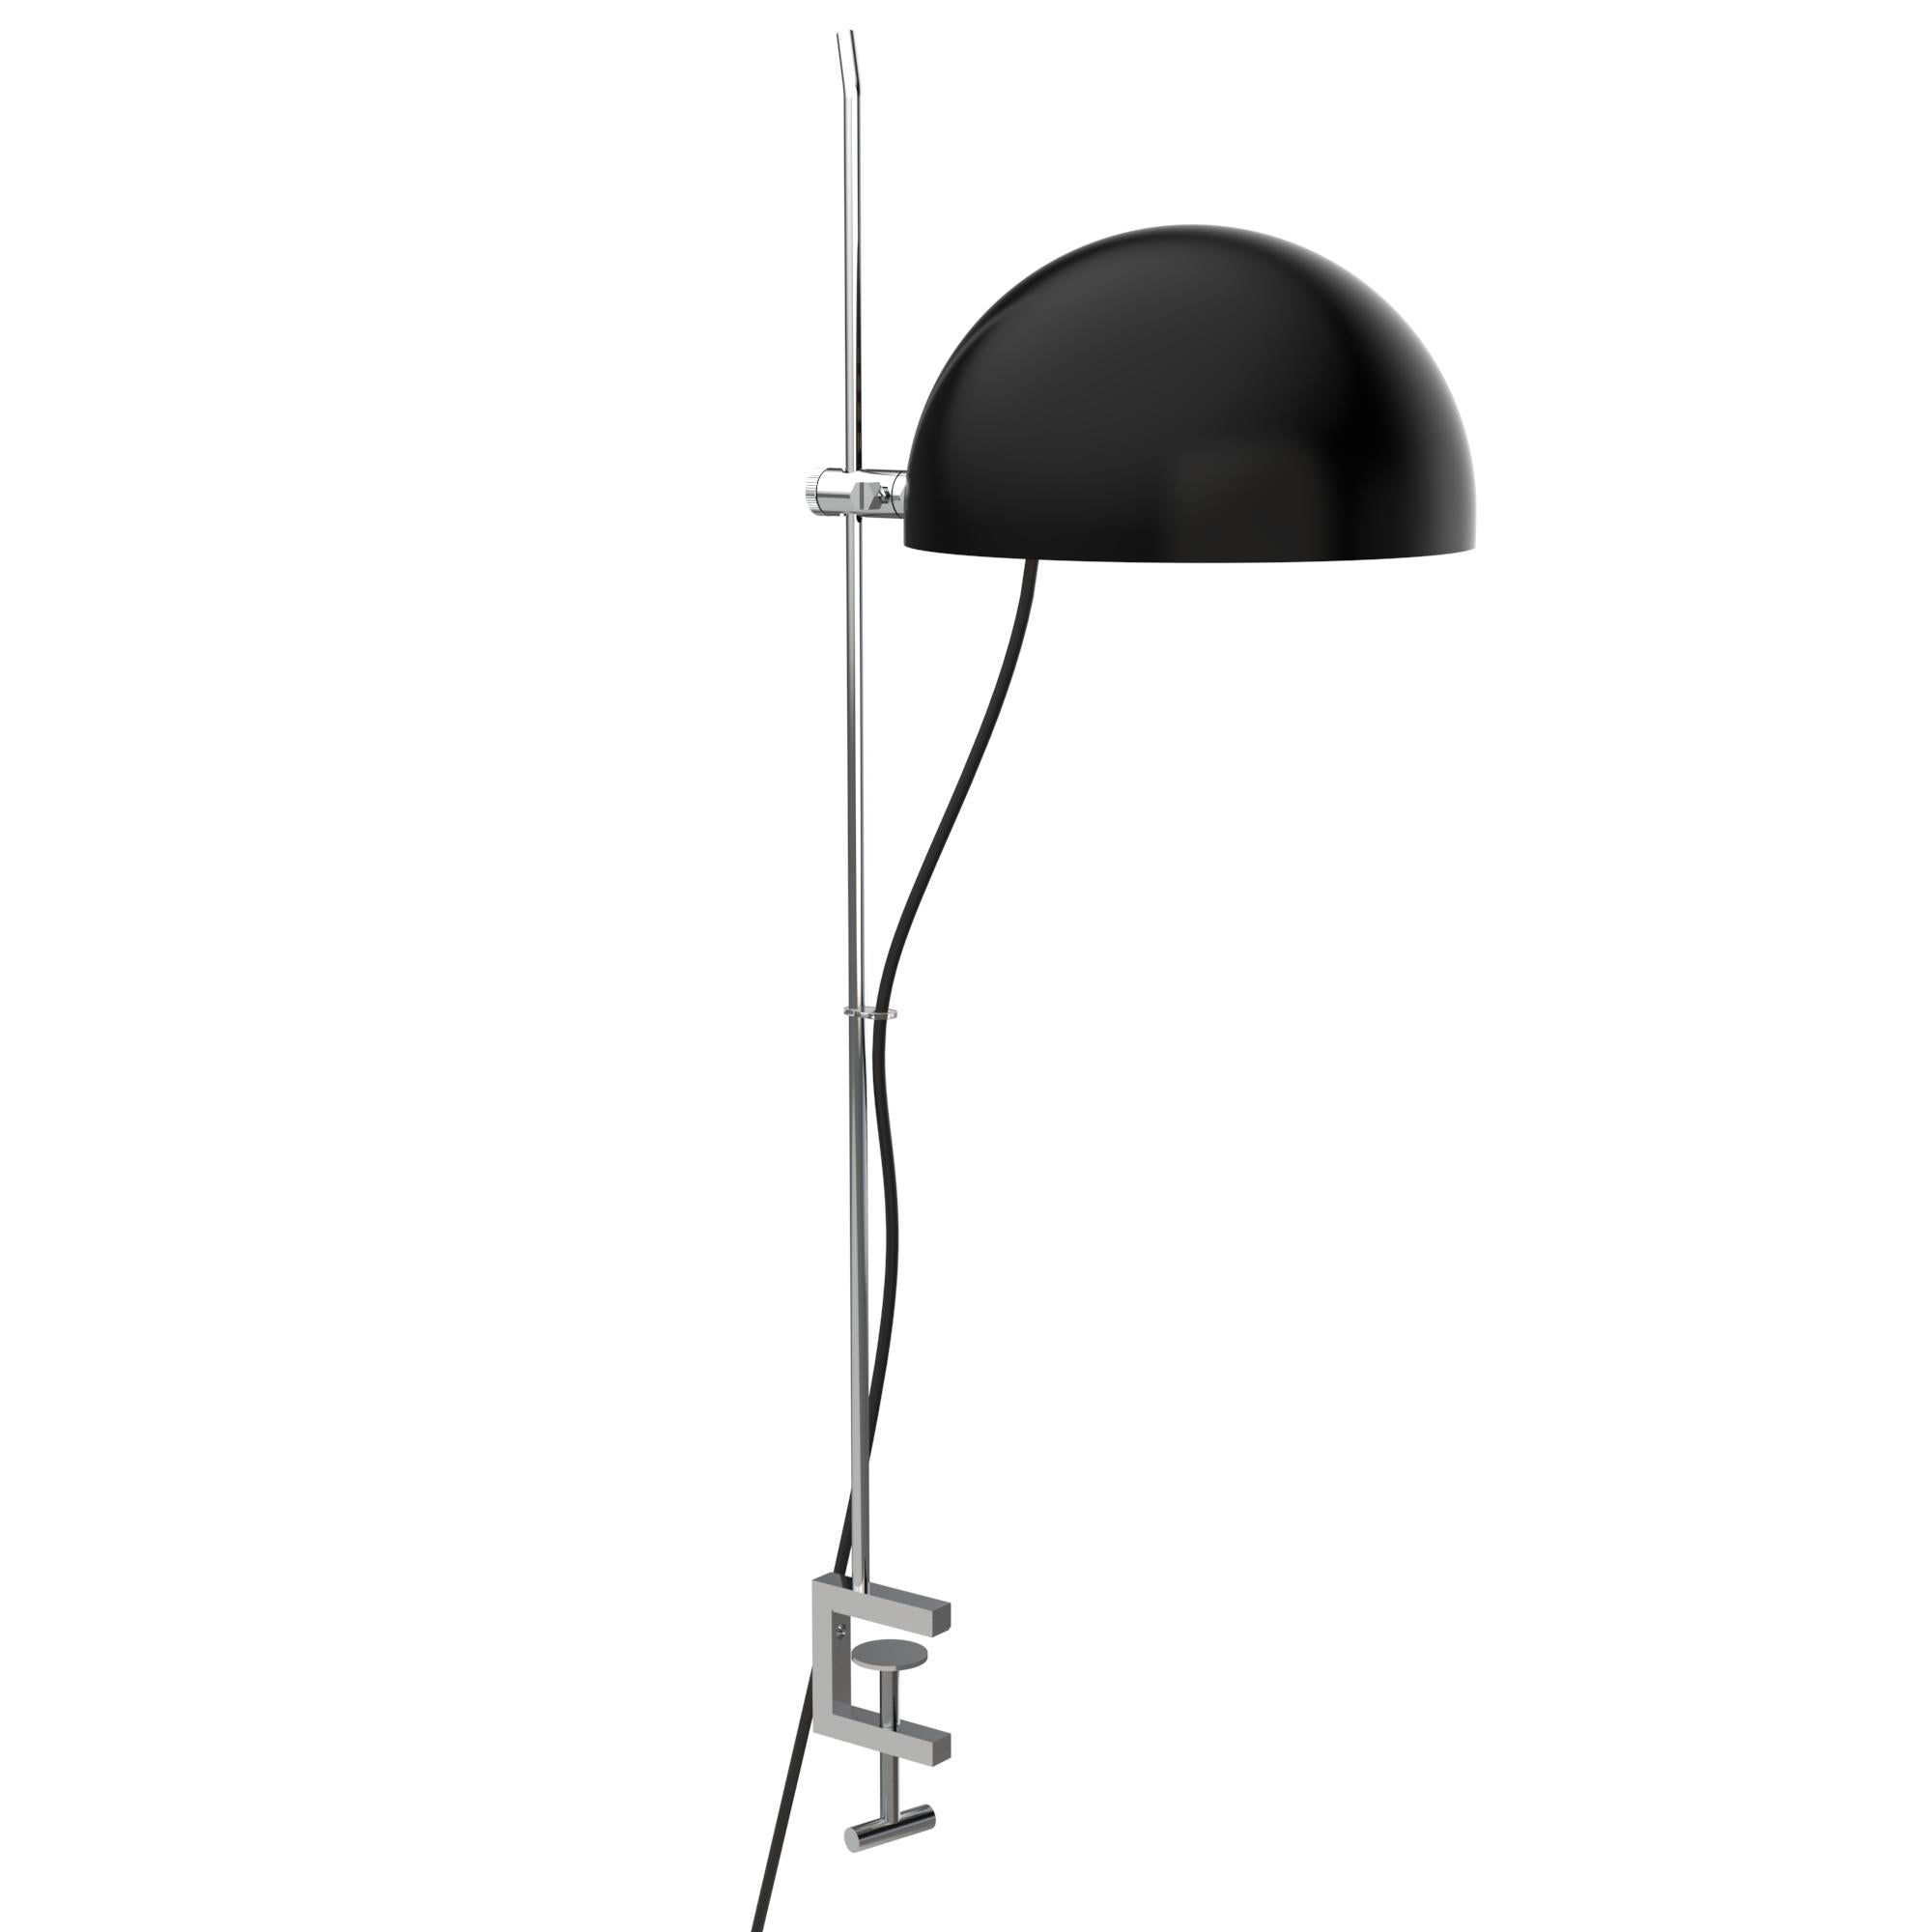 Alain Richard 'A22f' Task Lamp in Black for Disderot In New Condition For Sale In Glendale, CA